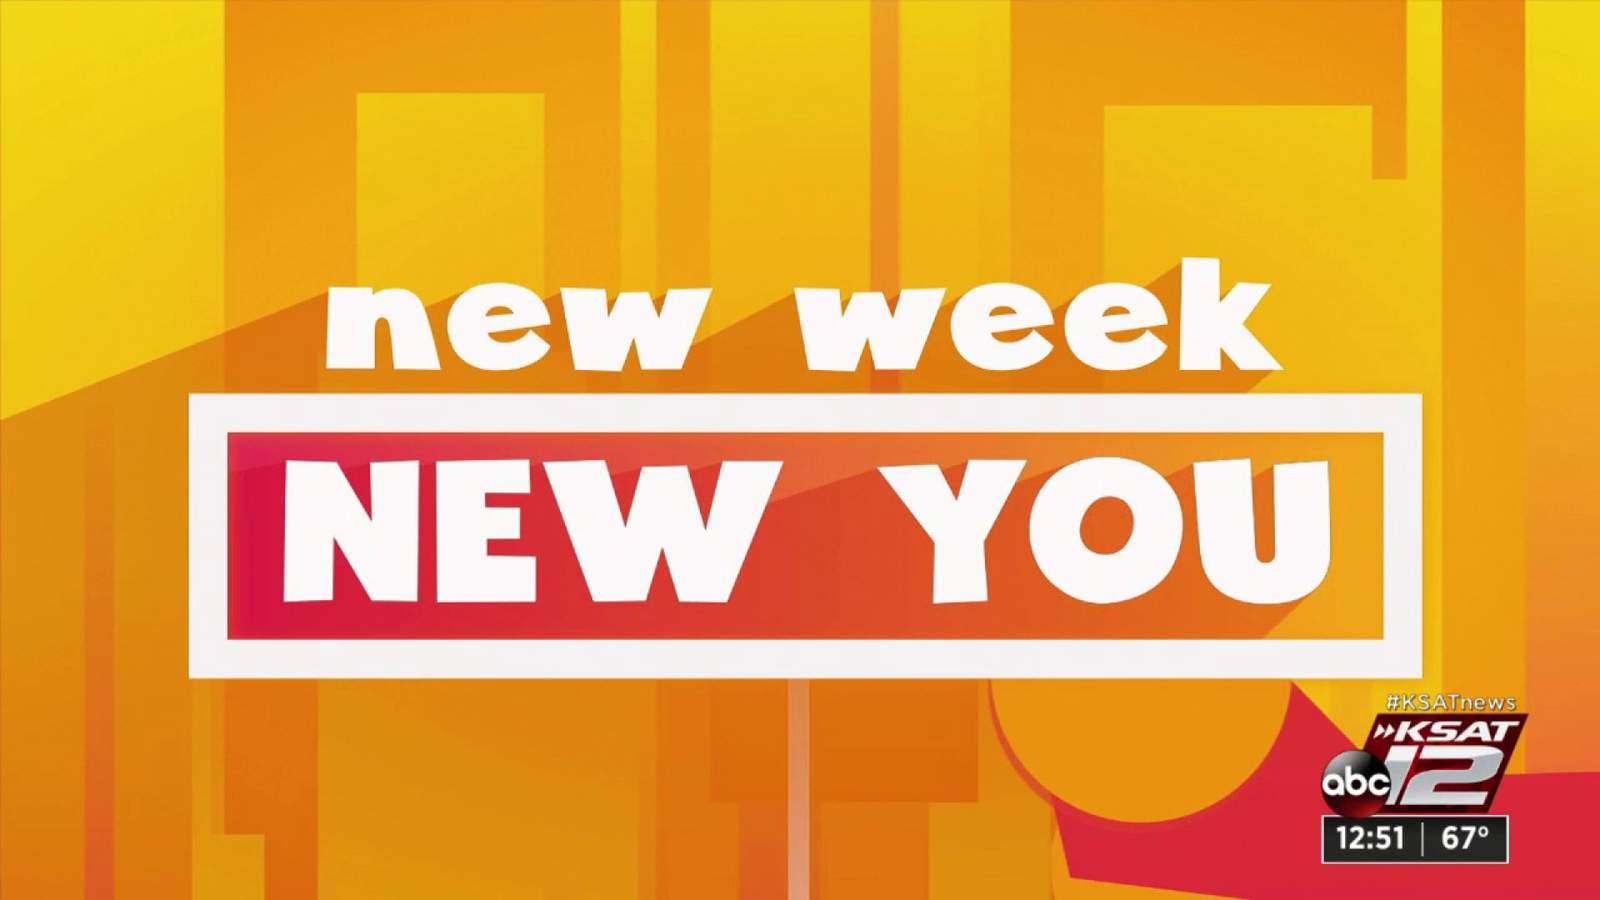 ‘New Week. New You:’ New Year Resolutions